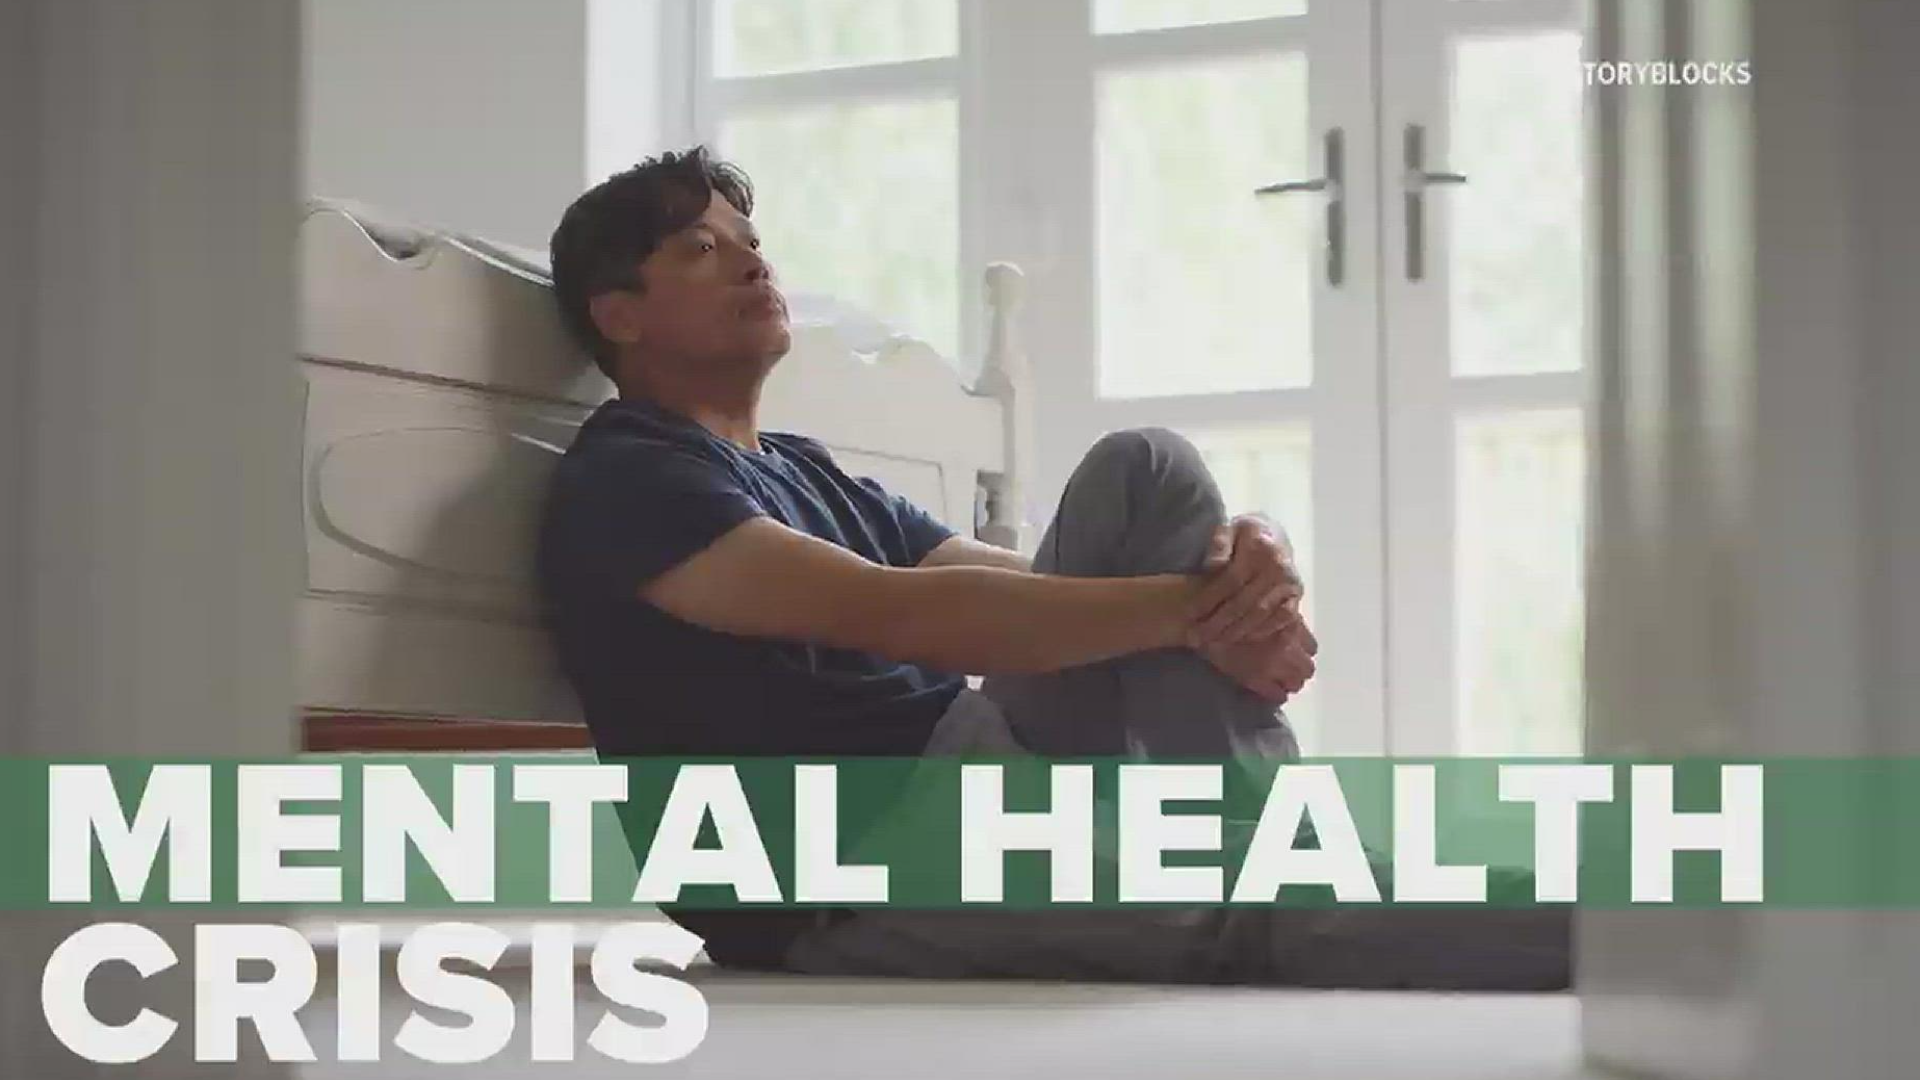 This extended version of the FOX43 News special includes full interviews with our experts on mental health topics.